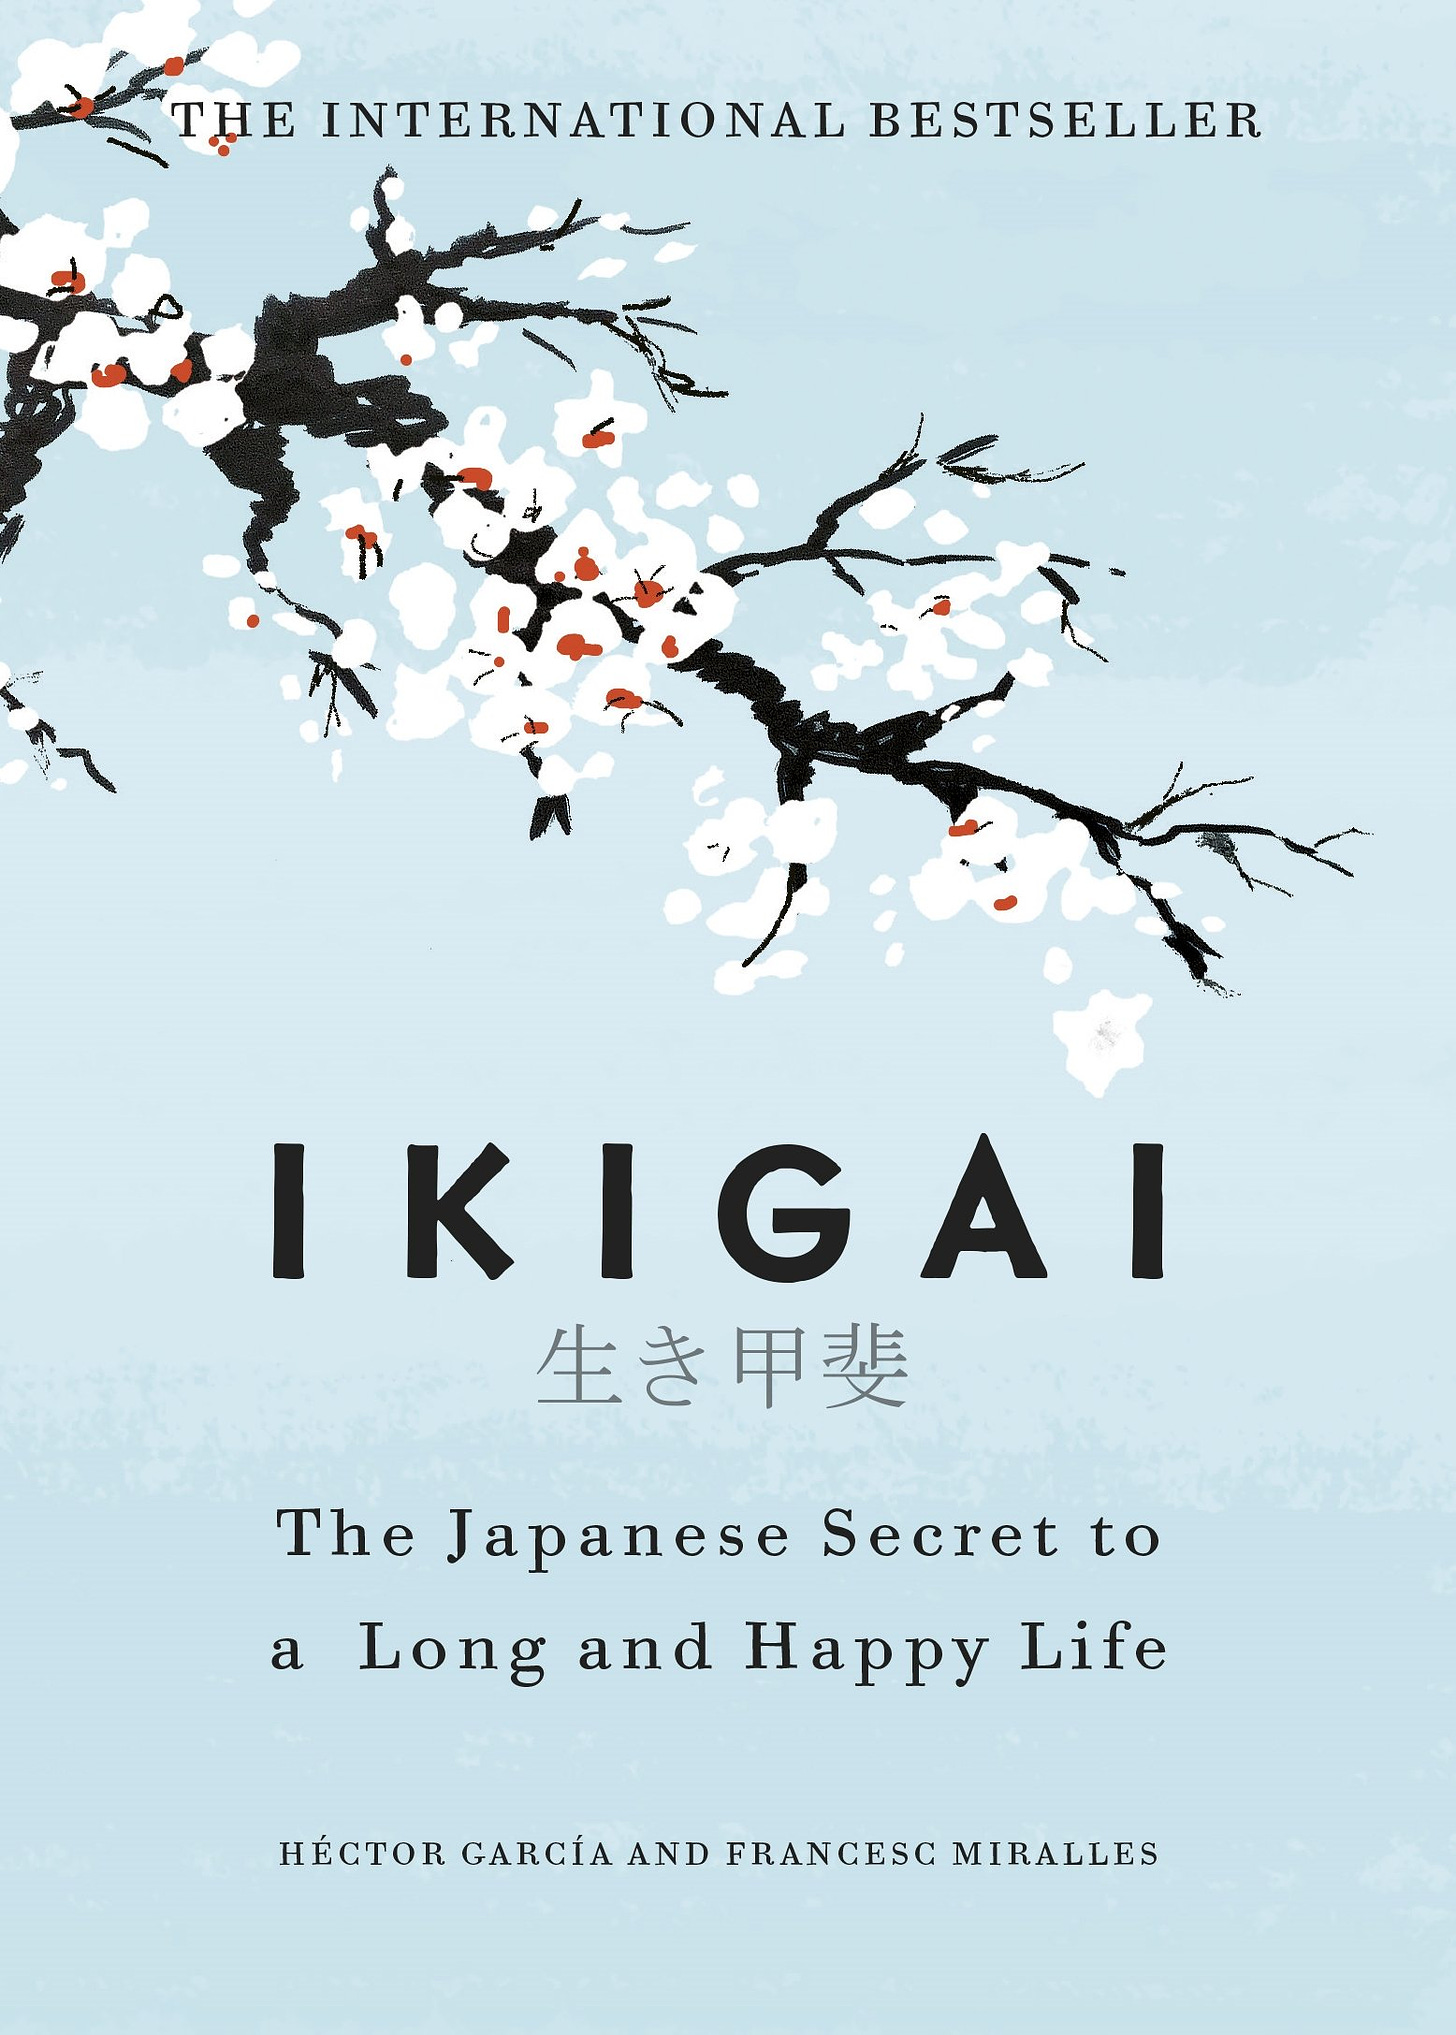 Ikigai: The Japanese secret to a long and happy life [Hardcover] García,  Héctor and Miralles, Francesc : García, Héctor, Miralles, Francesc:  Amazon.in: Books